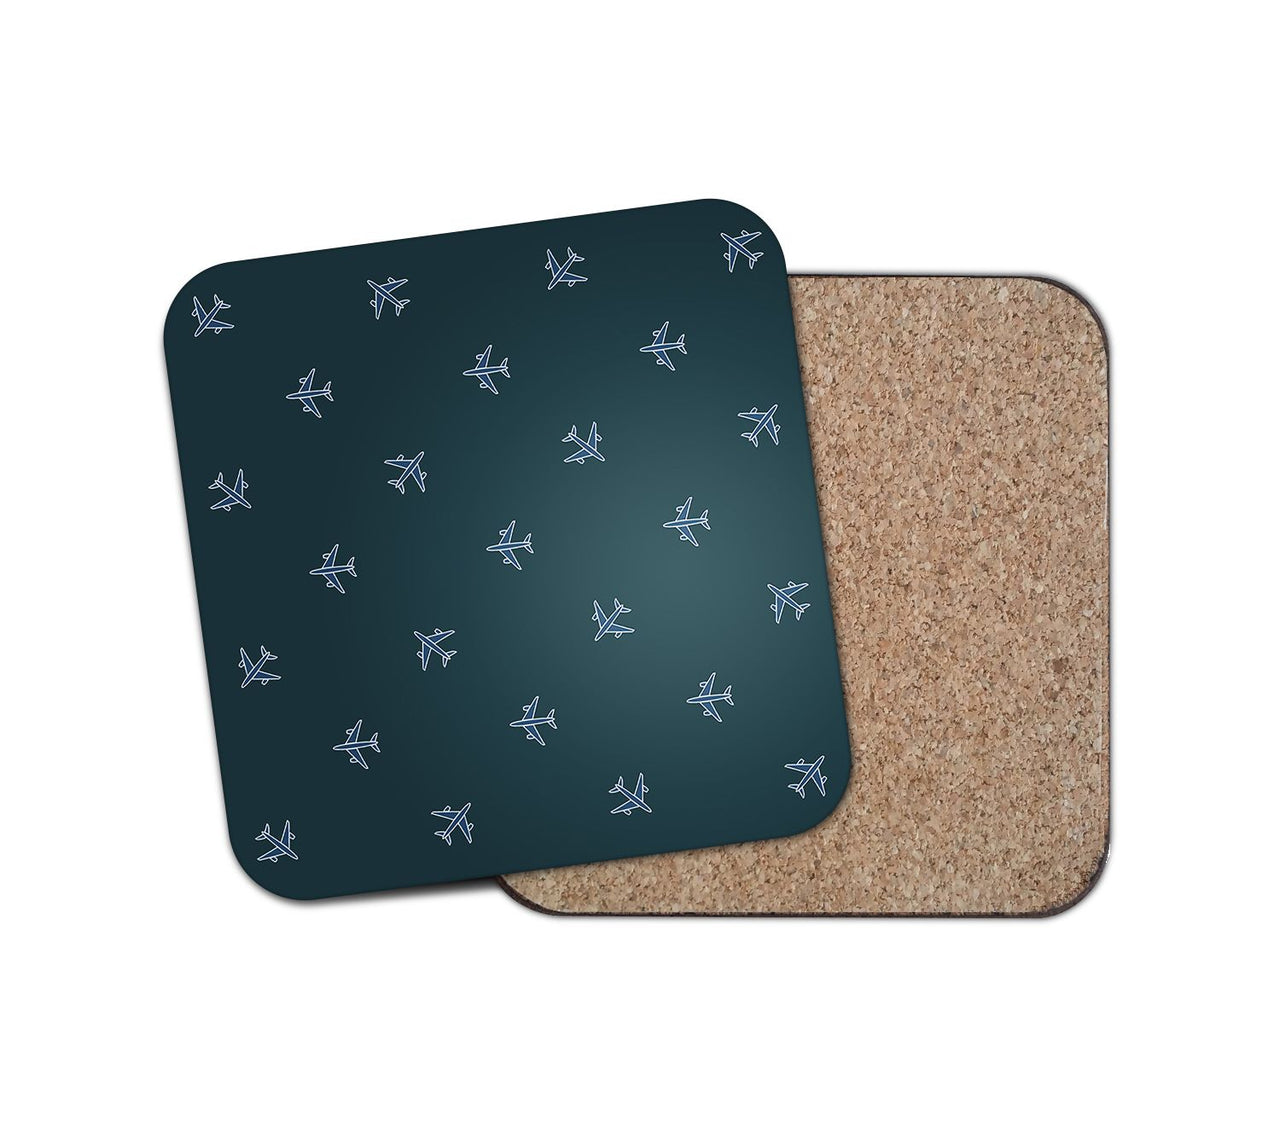 Nice Airplanes (Green) Designed Coasters